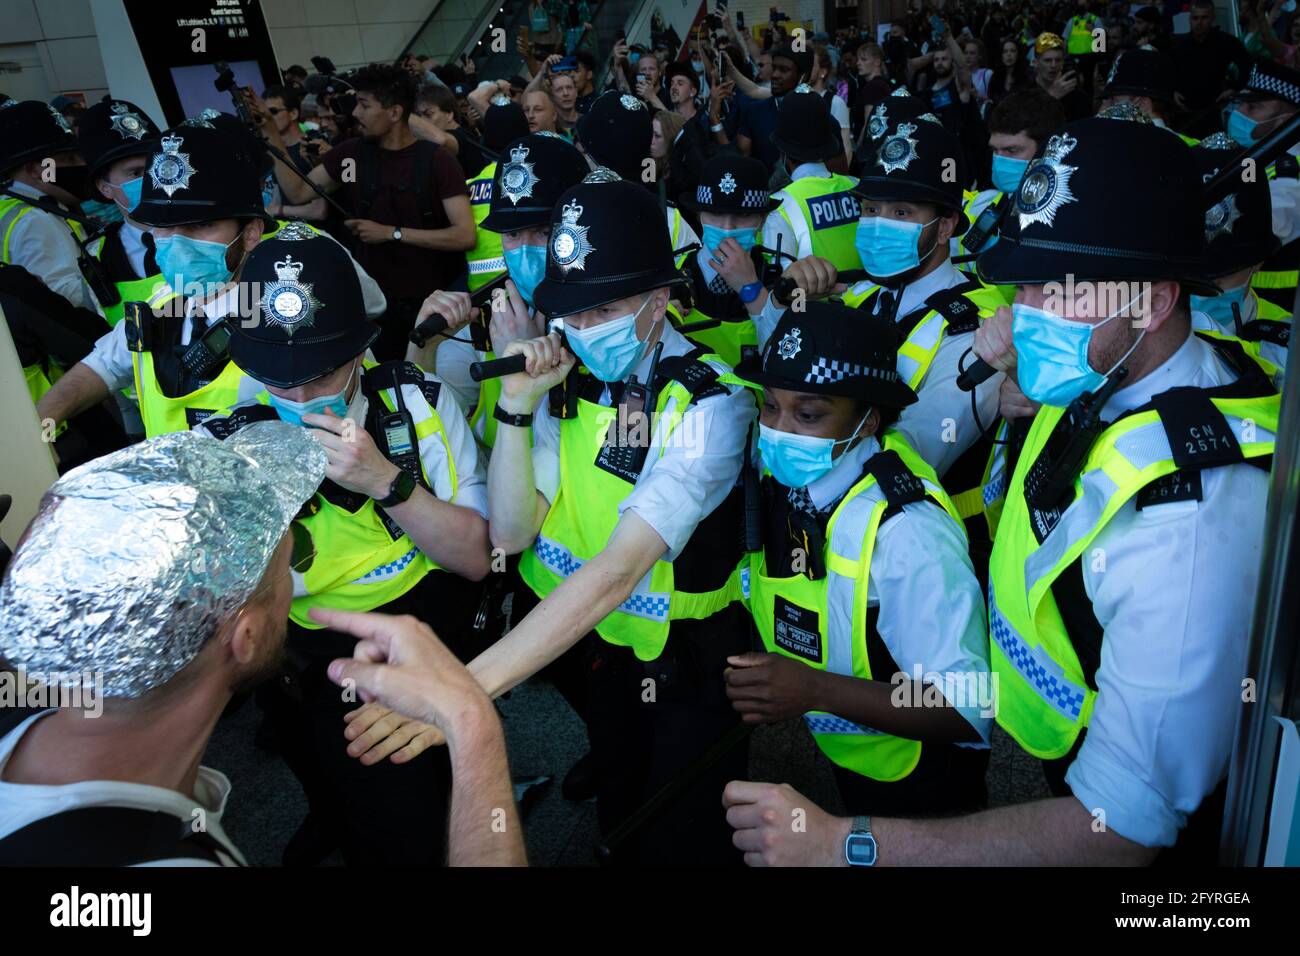 Manchester, UK. 29th May, 2021. The police hold back protesters from storming the Westfield shopping centre during a anti-lockdown protest. The number of people attending the protests has increased month on month since the introduction of the COVID-19 restrictions. Credit: Andy Barton/Alamy Live News Stock Photo